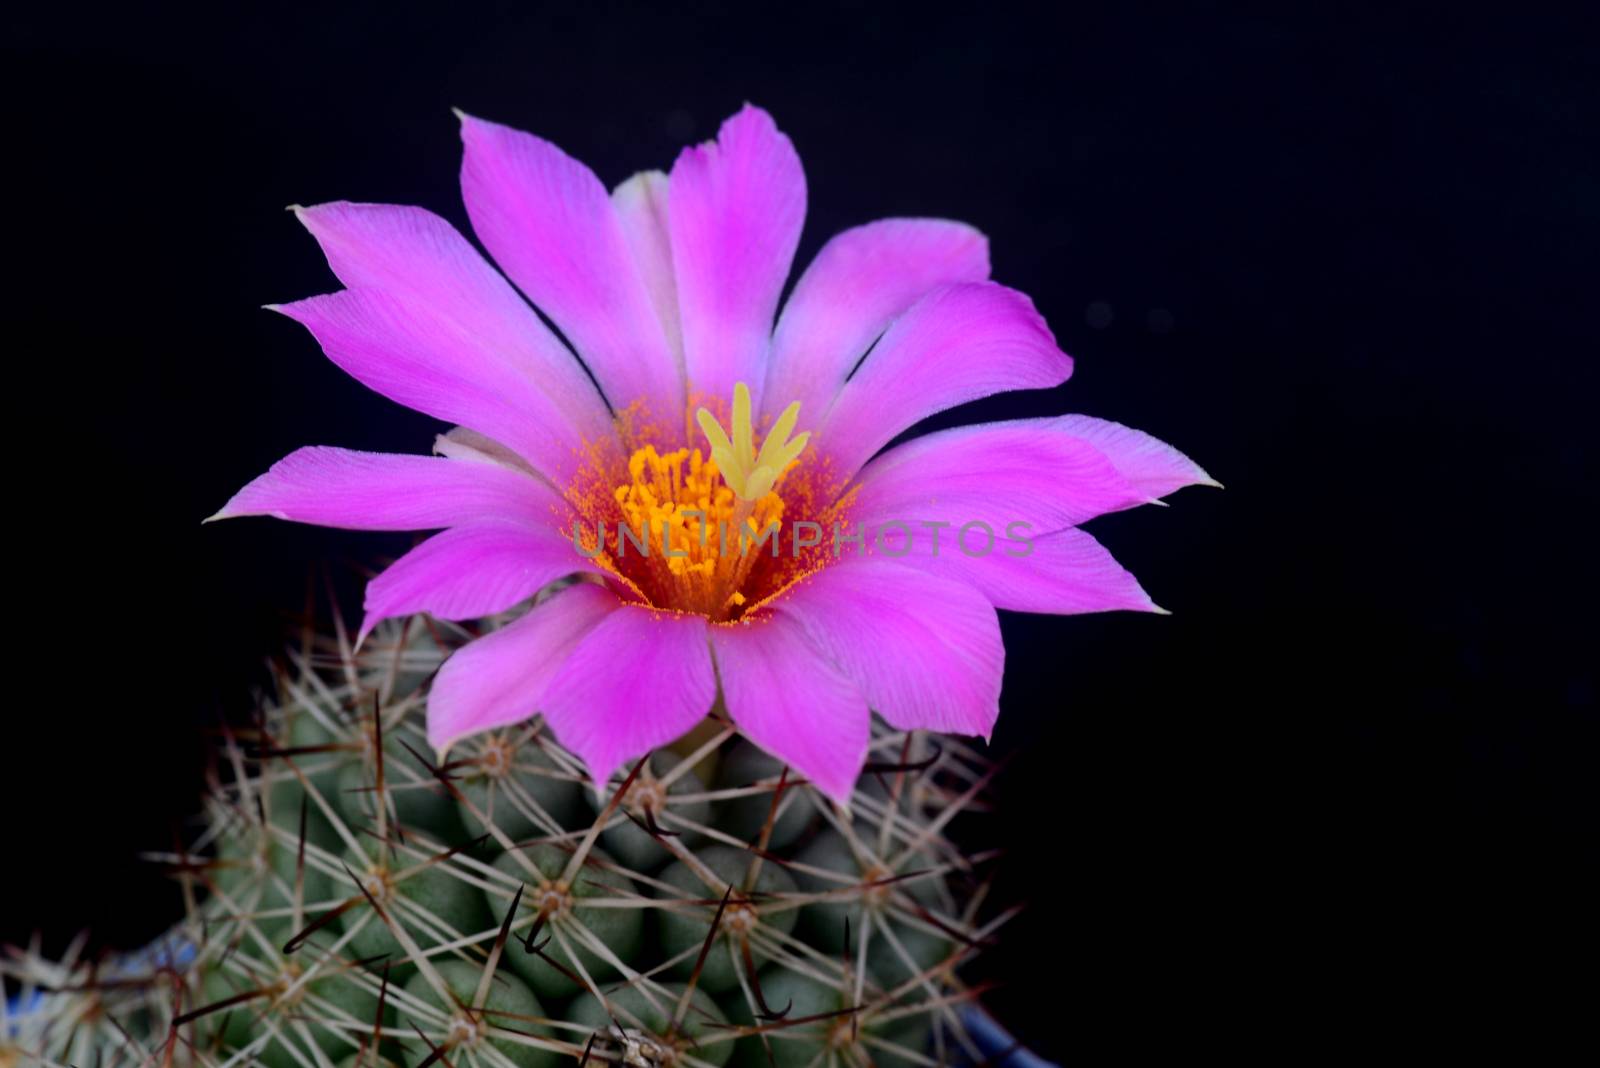 Blooming pink  flower of Mammillaria schumannii  cactus on  black  background with copy space for text